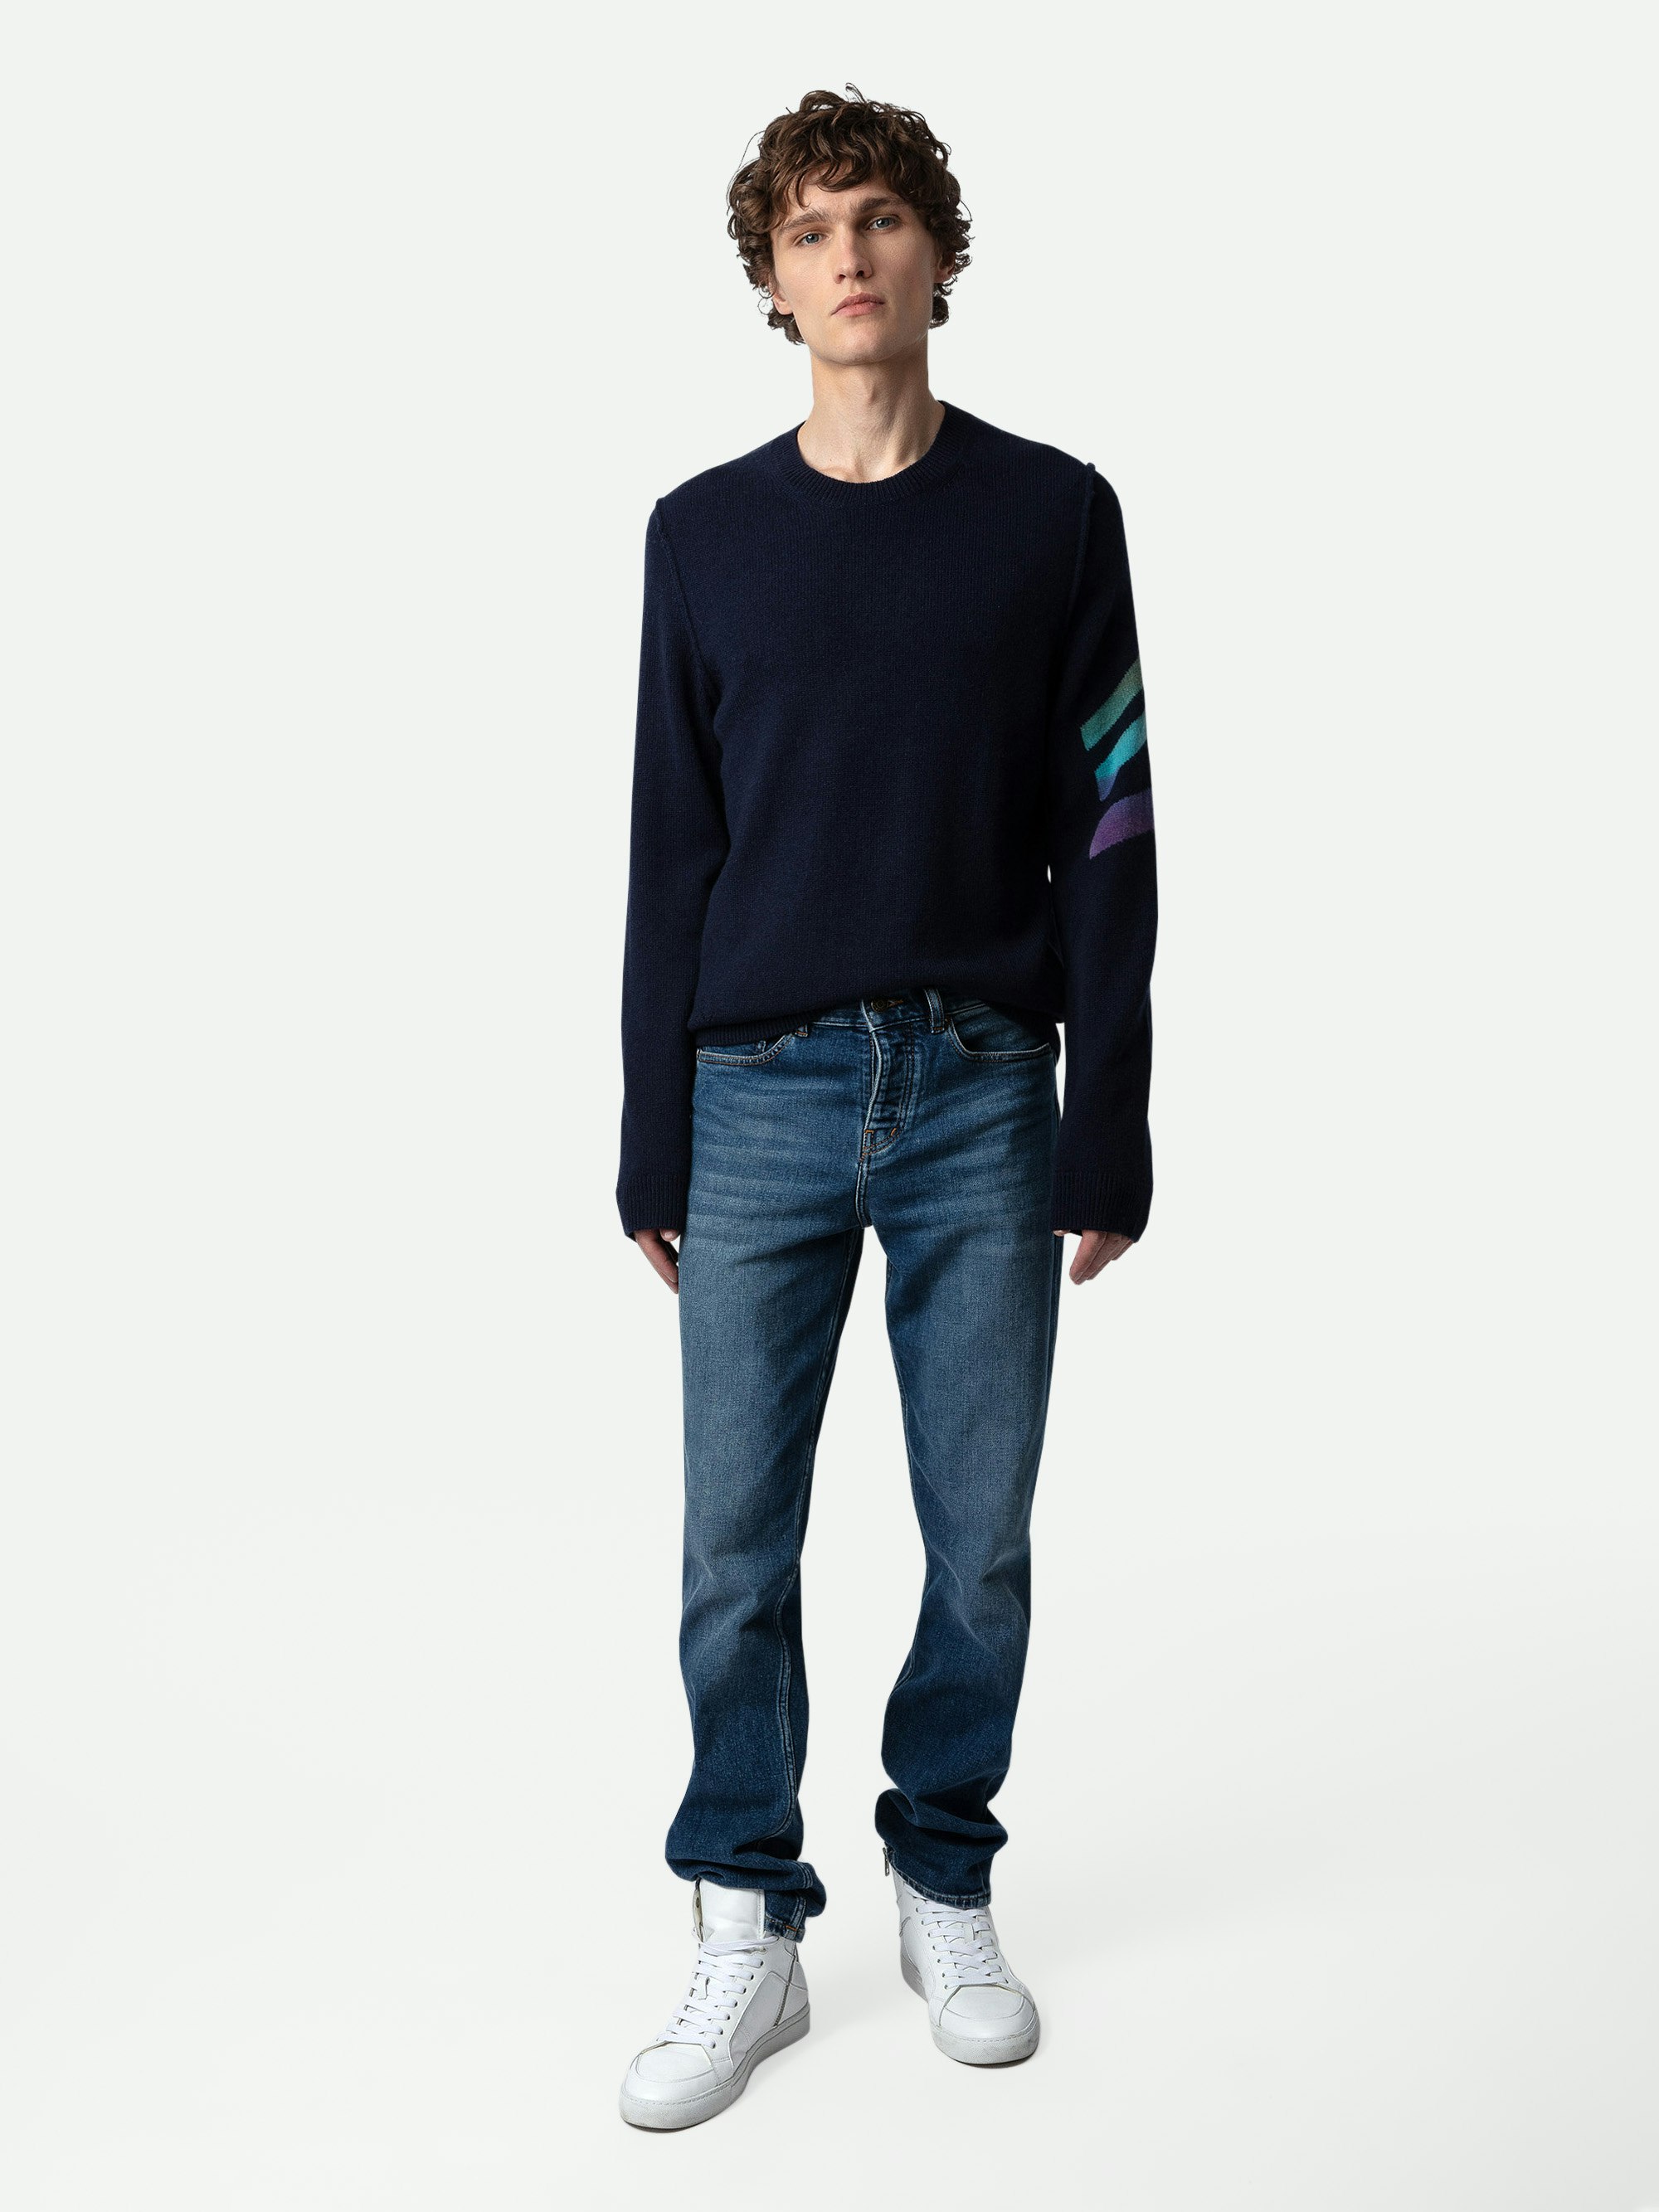 Kennedy Jumper 100% Cashmere  - Navy blue 100% cashmere round-neck jumper with tie-dye arrows on the left sleeve.